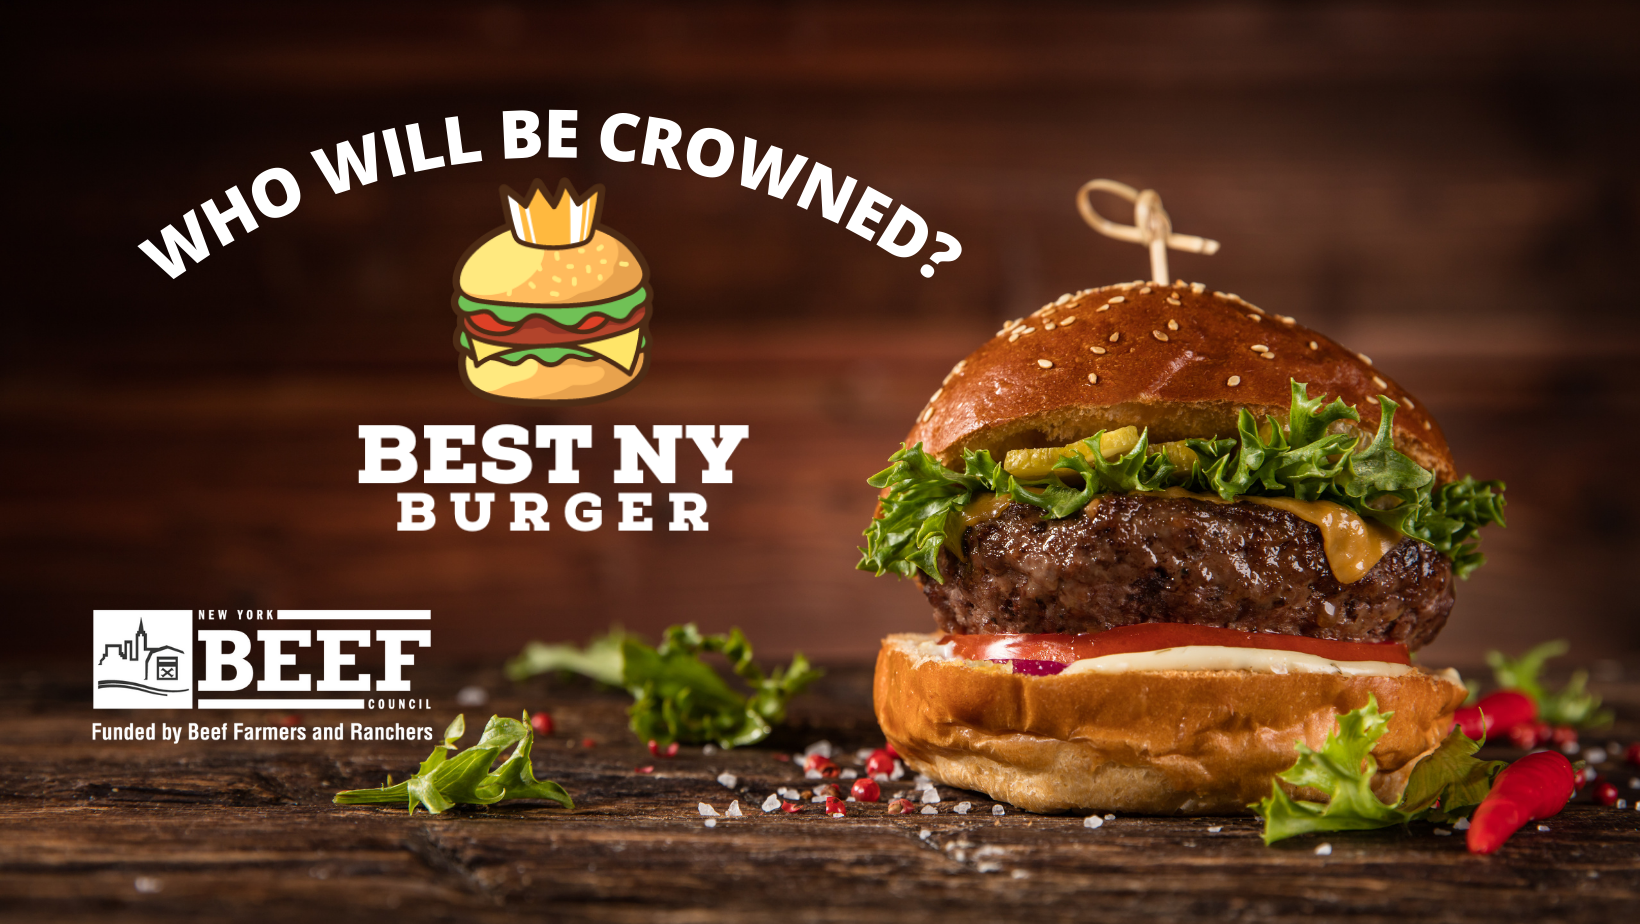 Search Begins for Best NY Burger